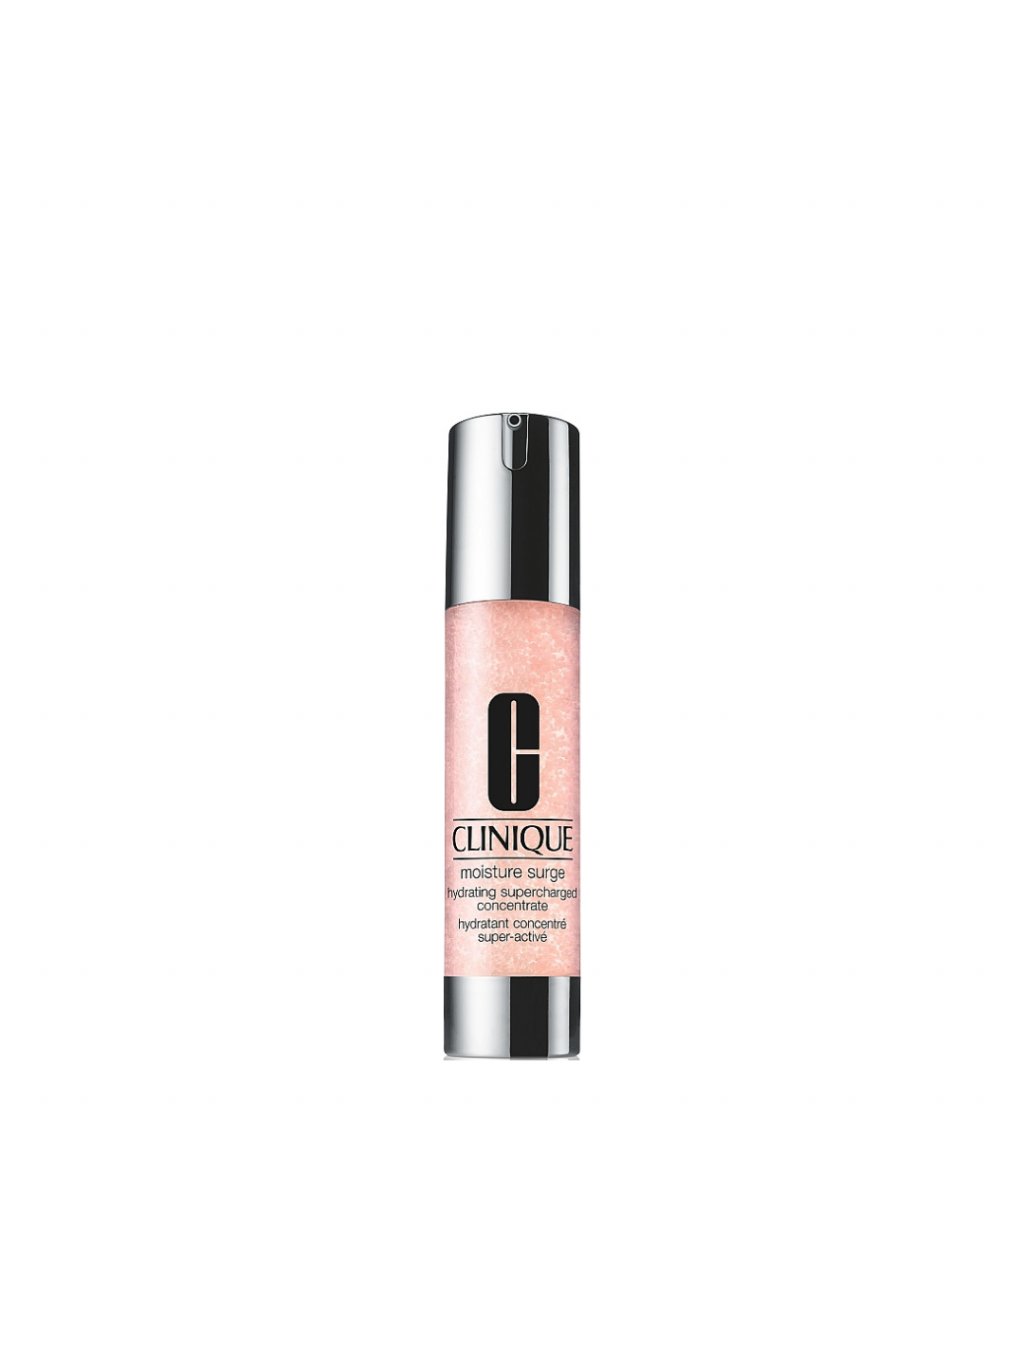 Moisture Surge Hydrating Supercharged Concentrate - Beauty Manifesto